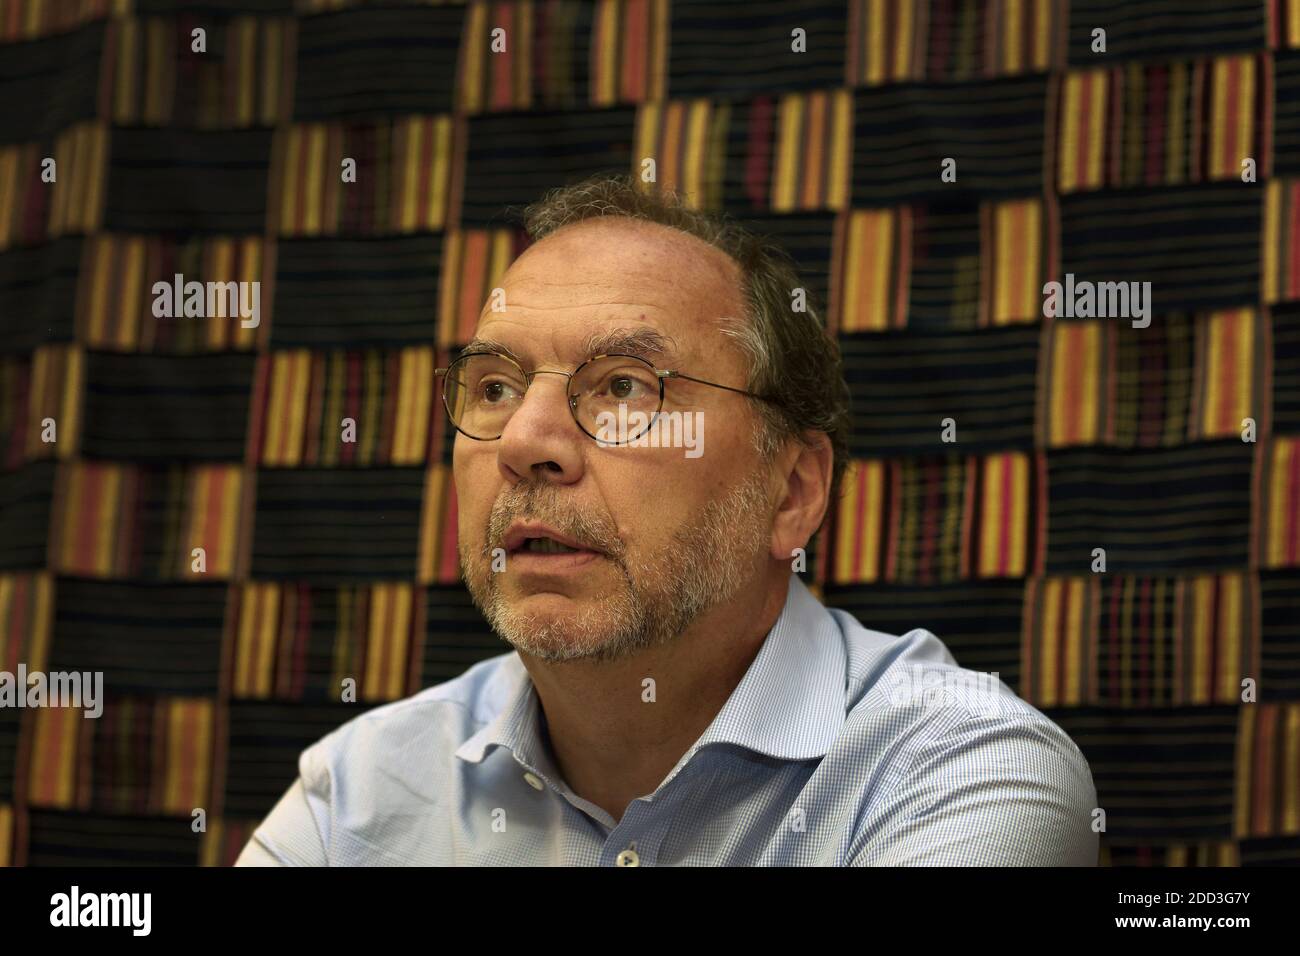 Great Britain / England / London / Prof Peter Piot, the Director of London School of Hygiene and Tropical Medicine. Stock Photo